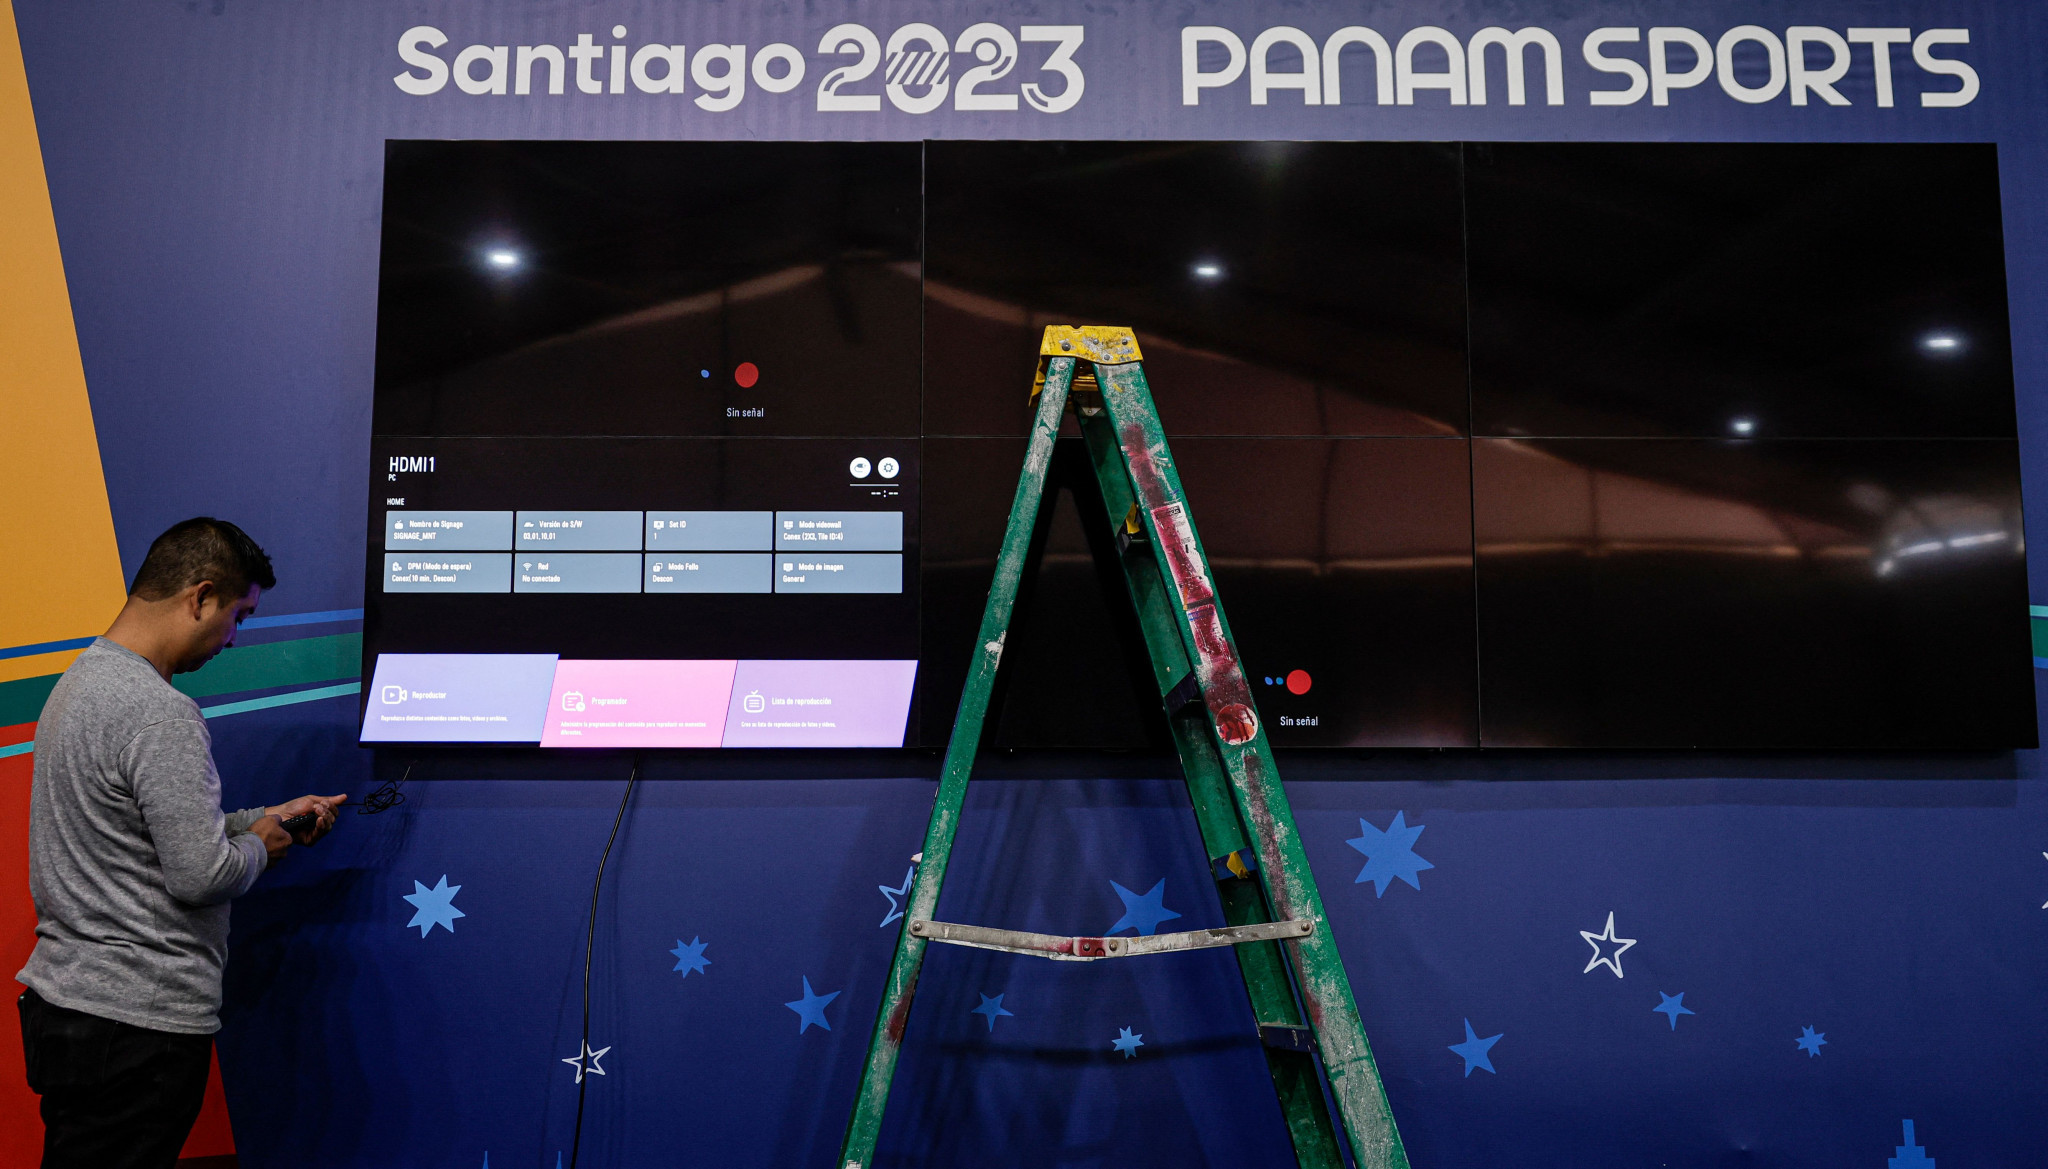 Panam Sports avoids World Anti-Doping Code non-compliance before Santiago 2023